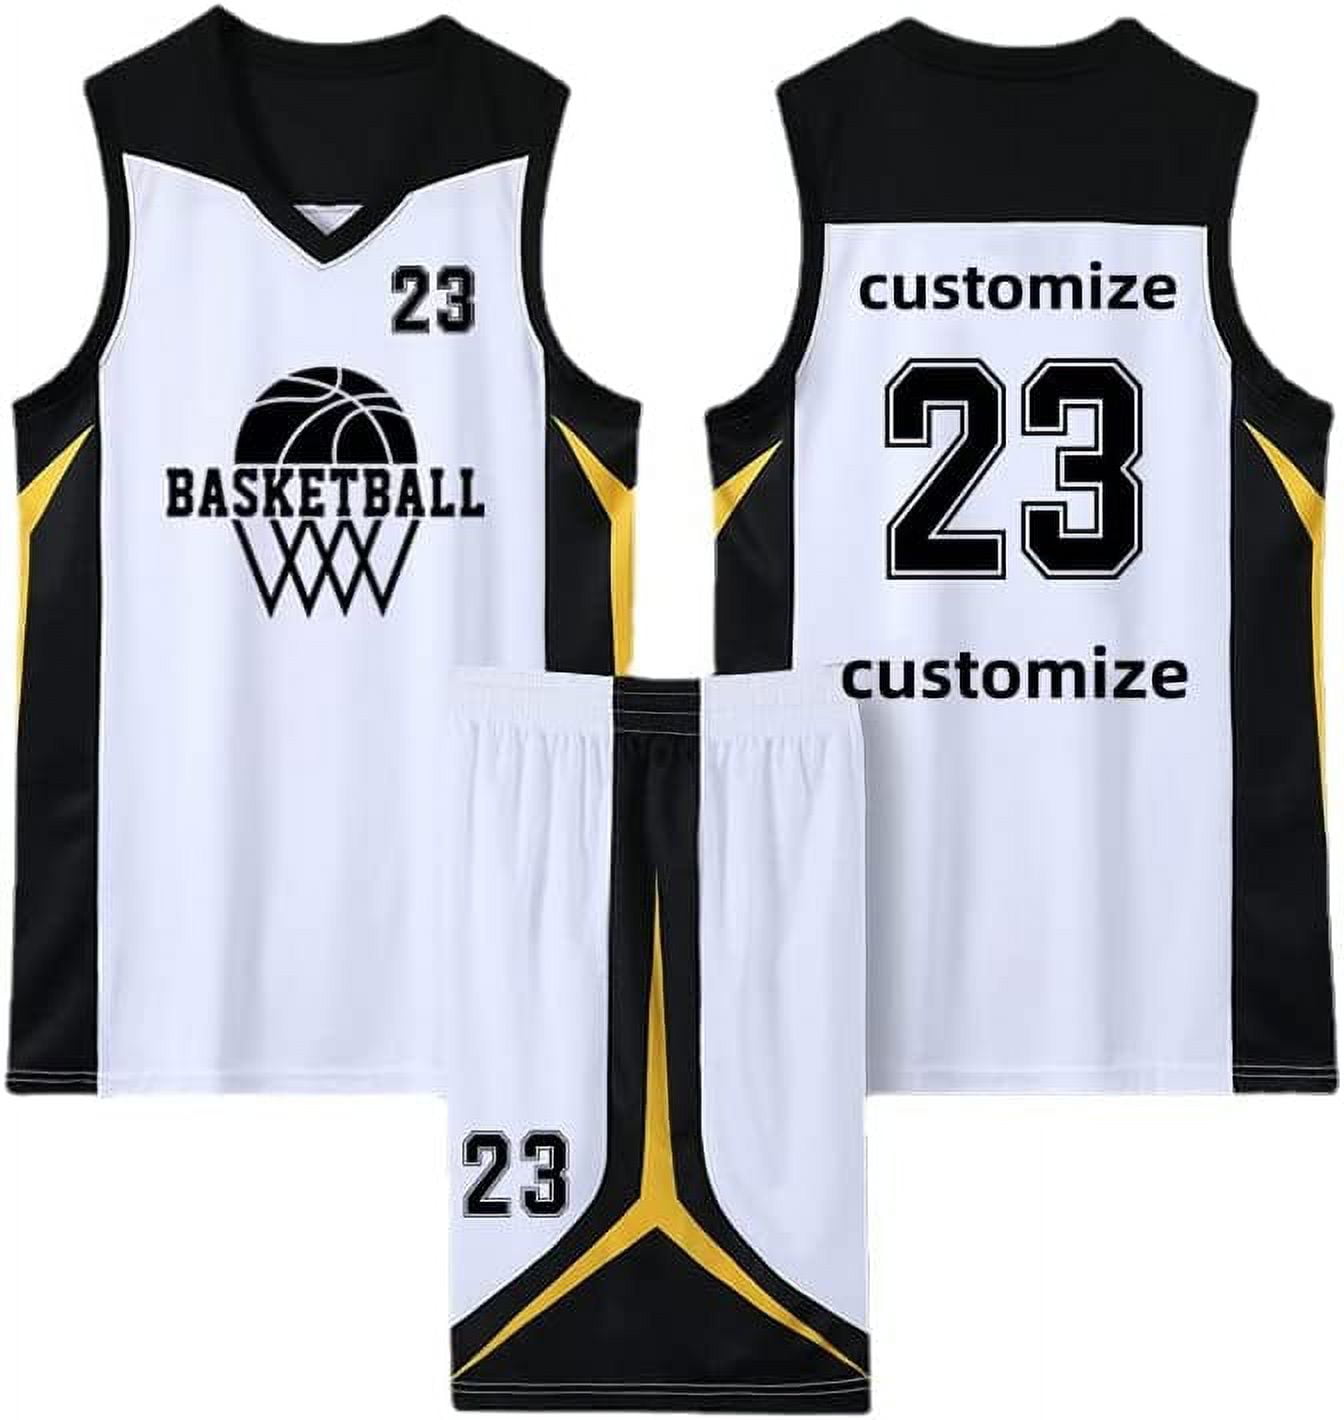  camouflage Custom Basketball Jersey Personalized Printed Your  Name & Number Men/Women/Kids Breathable Quick Dry Sportswear (10_Camo Navy)  : Clothing, Shoes & Jewelry